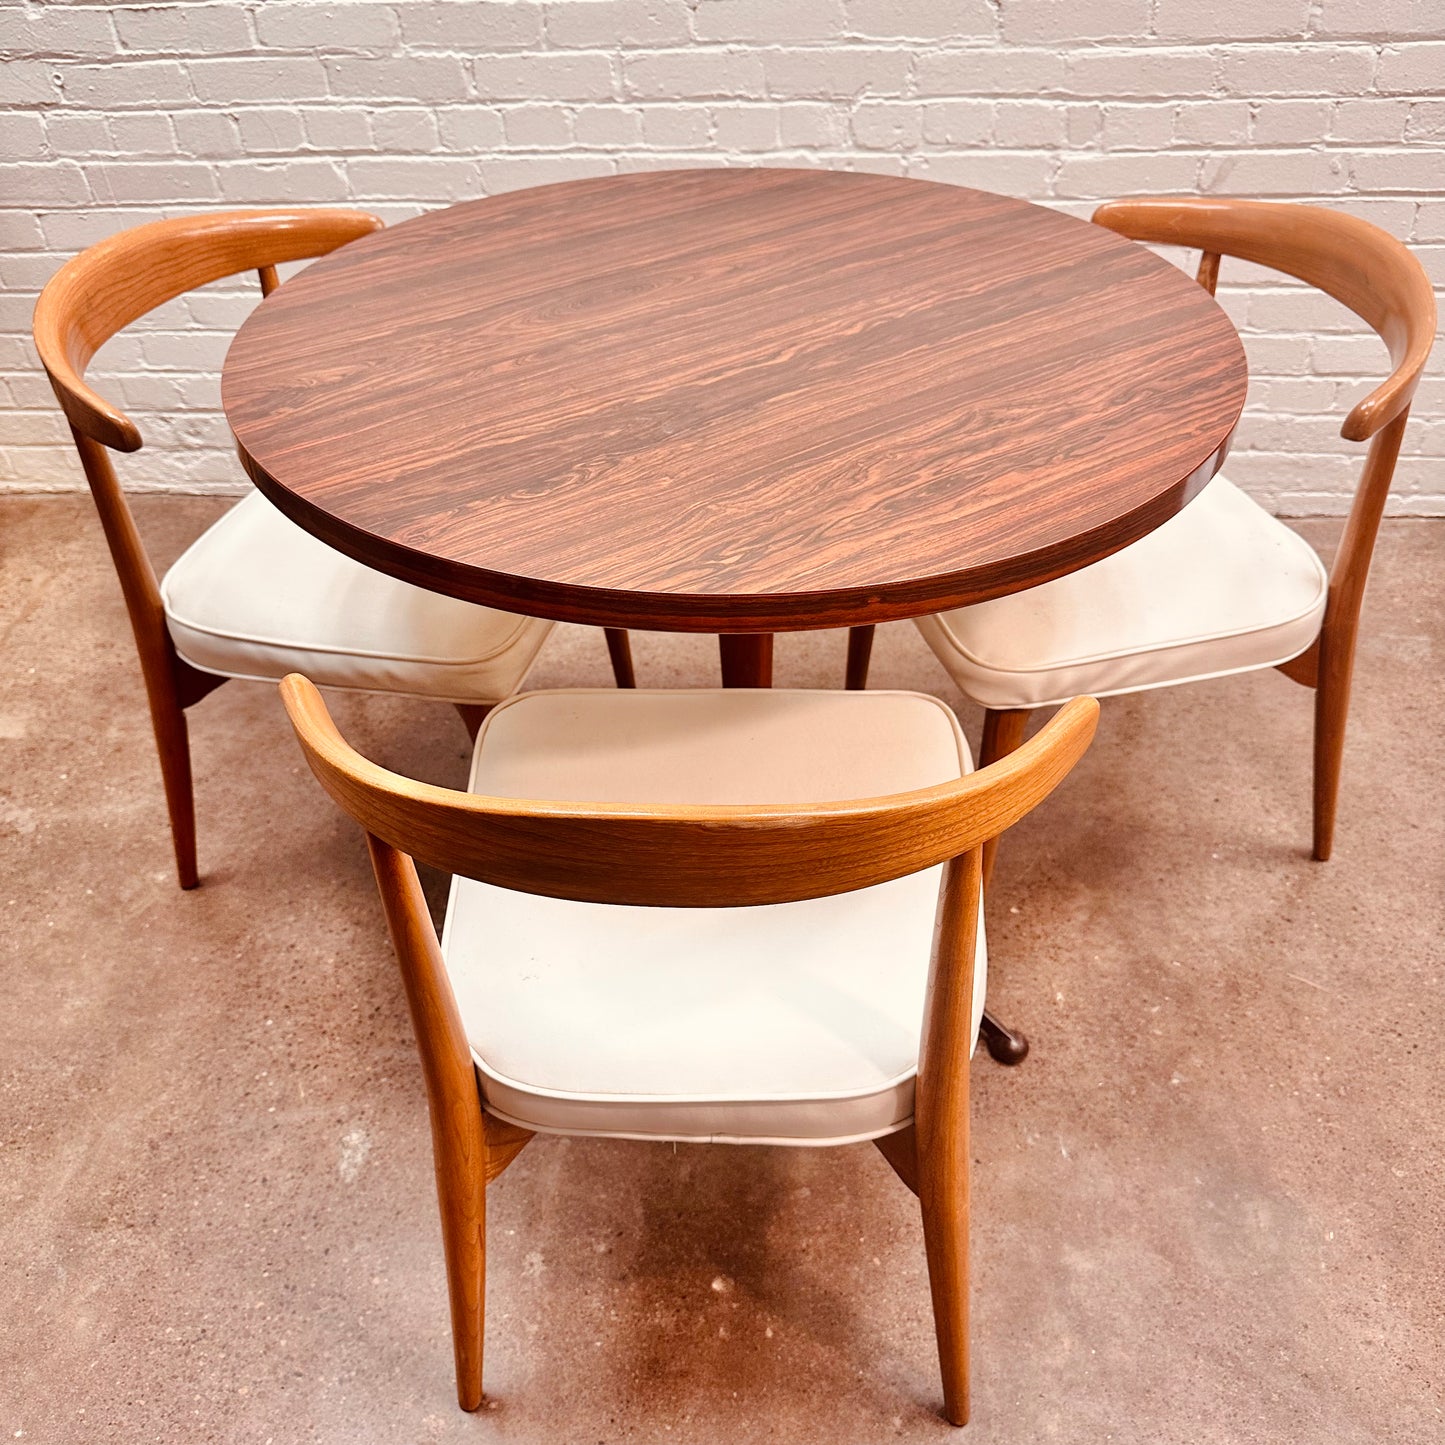 36” ROUND FAUX BOIS ROSEWOOD CAFE TABLE WITH STEEL LEGS